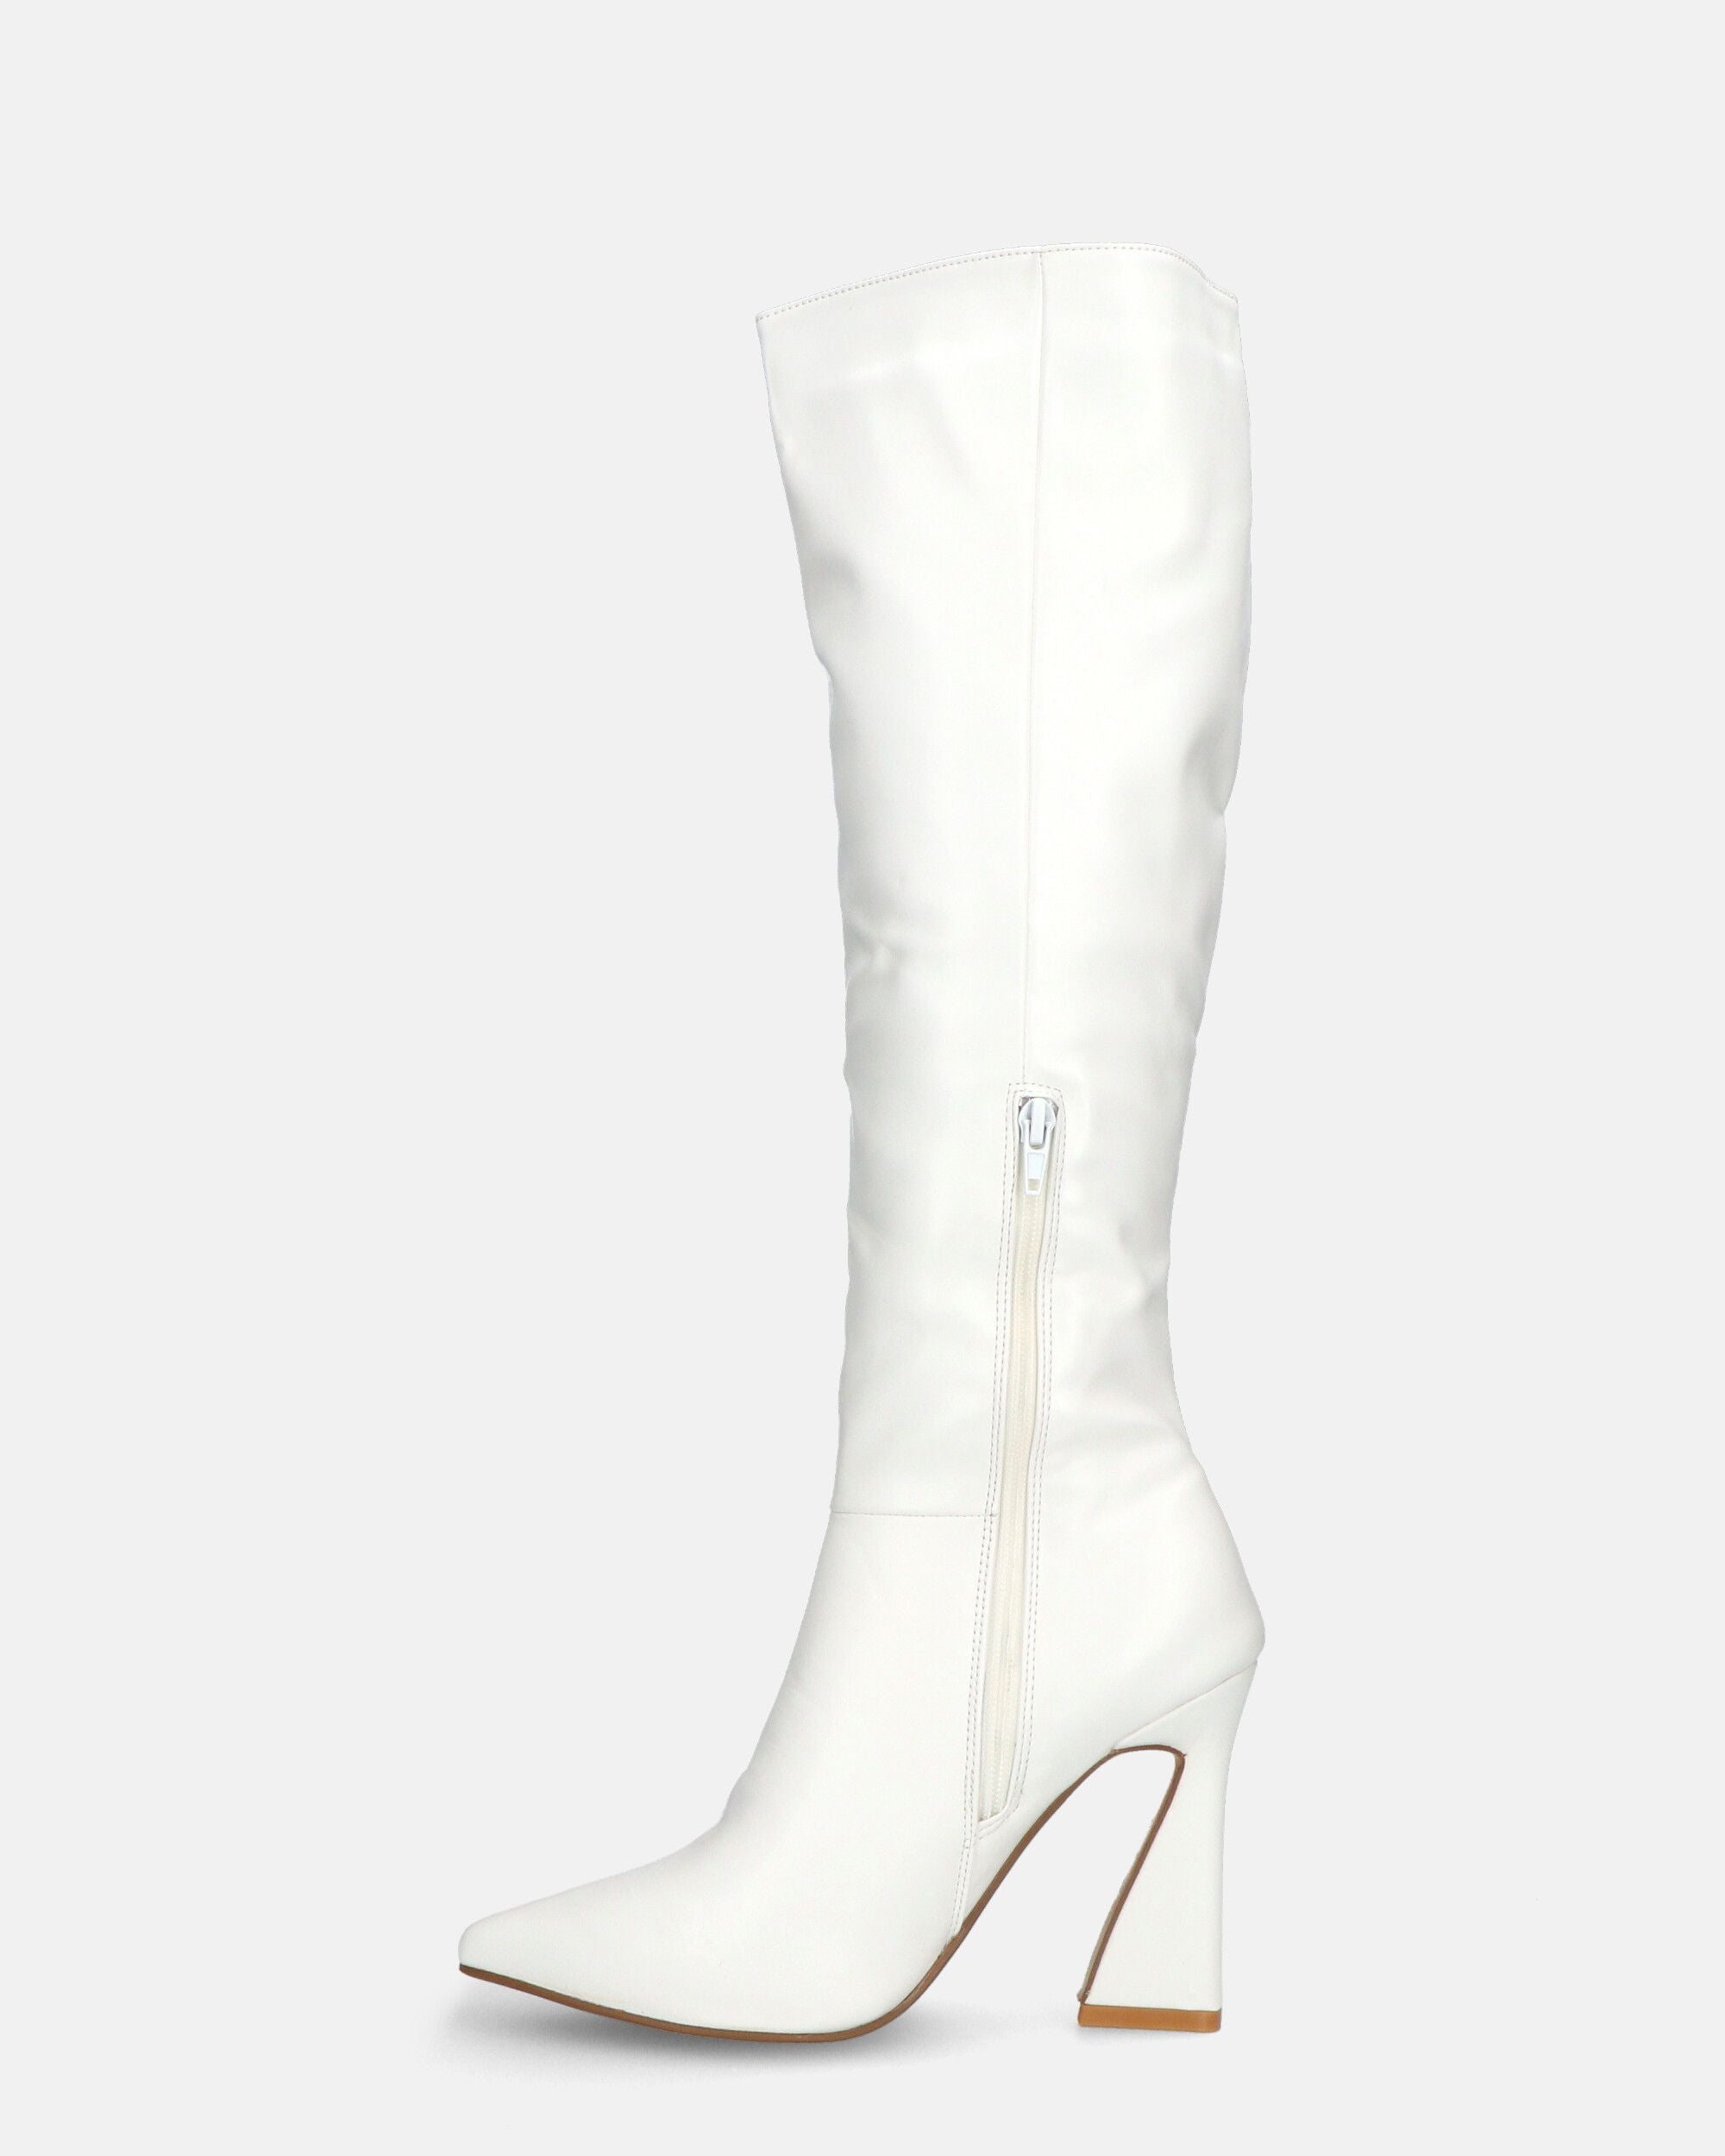 KELLY - white high boot with side zip